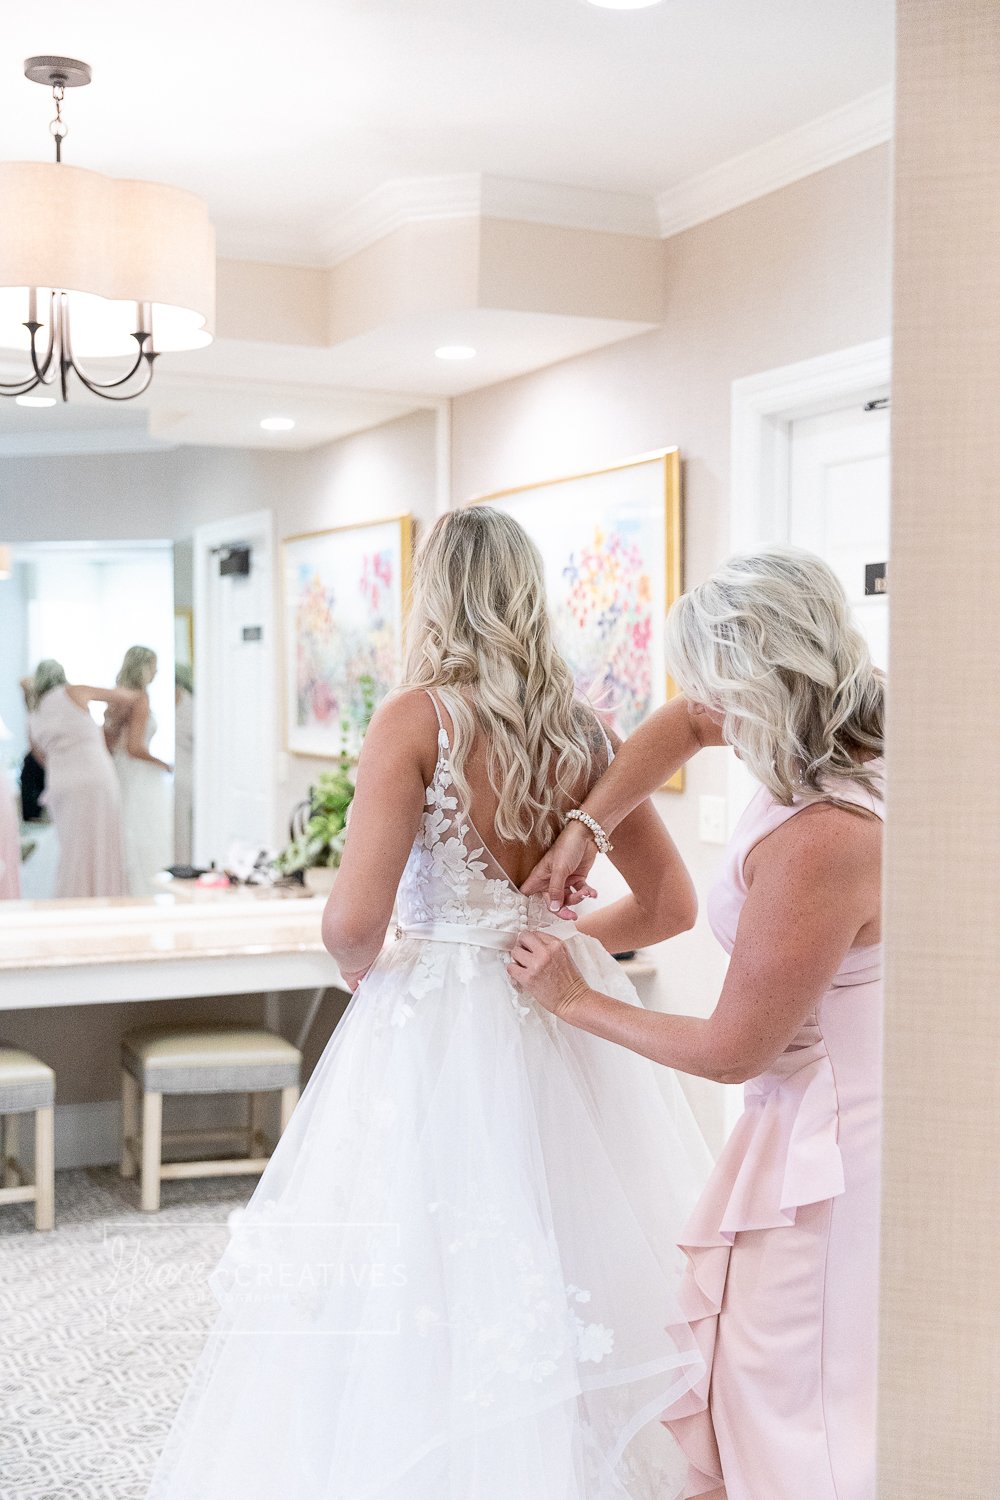 Mother Helping her daughter get ready on her wedding day